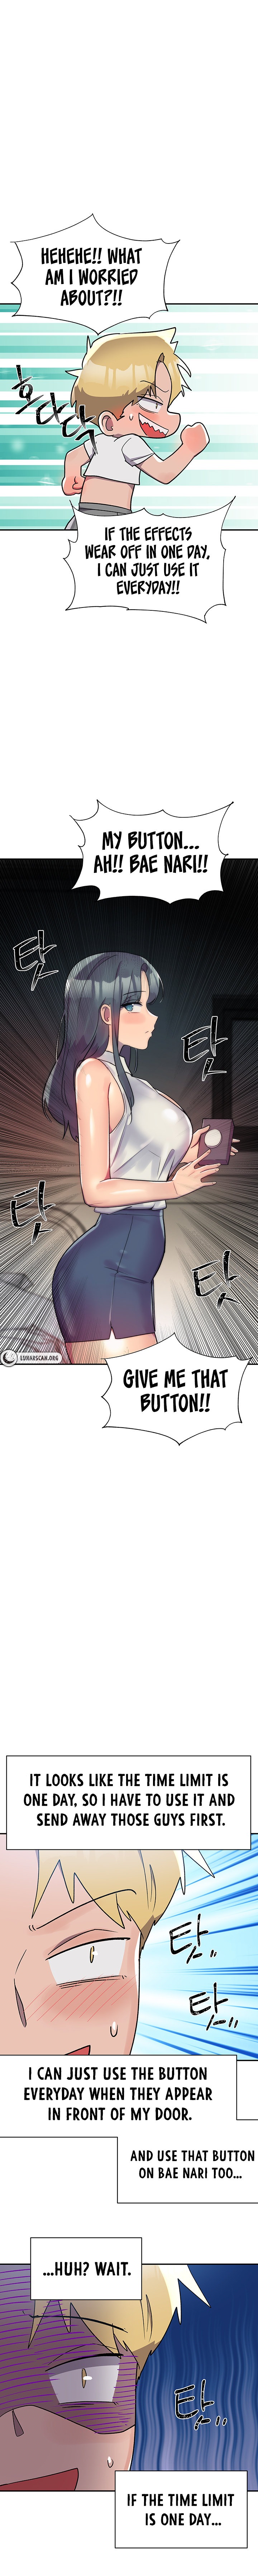 Relationship Reverse Button: Let’s Educate That Arrogant Girl - Chapter 7 Page 17